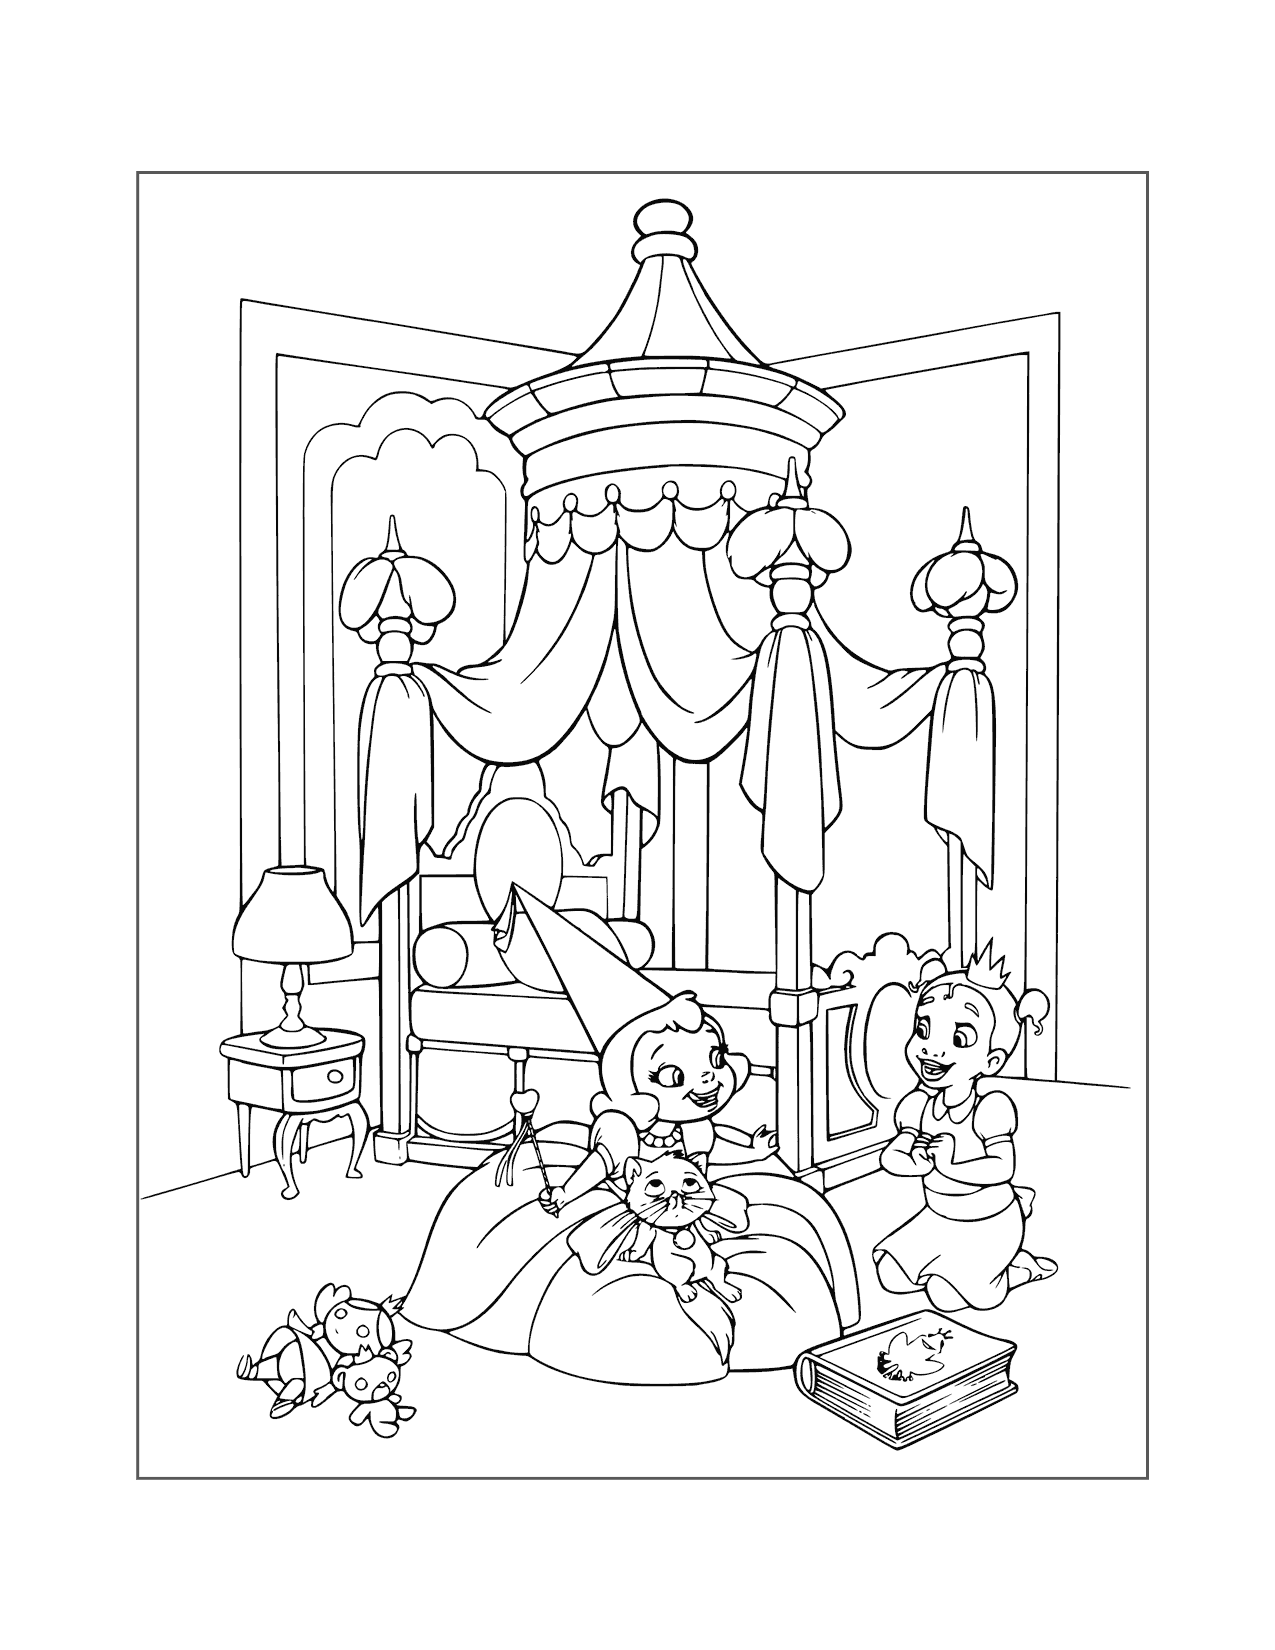 Tiana And Charlotte Play Together As Children Coloring Page